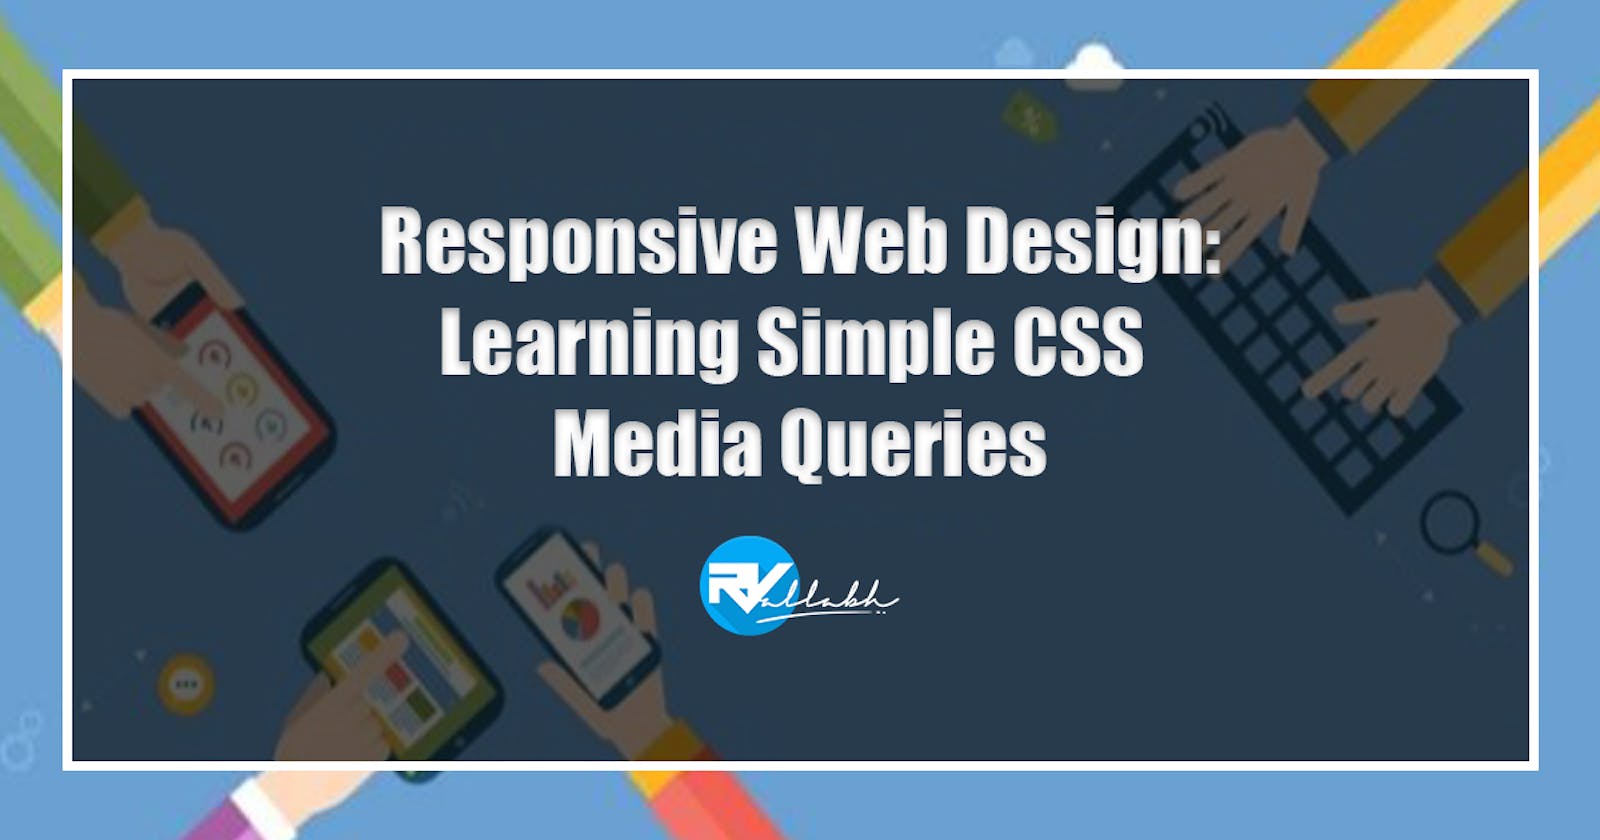 Responsive Web Design: Learning Simple CSS Media Queries